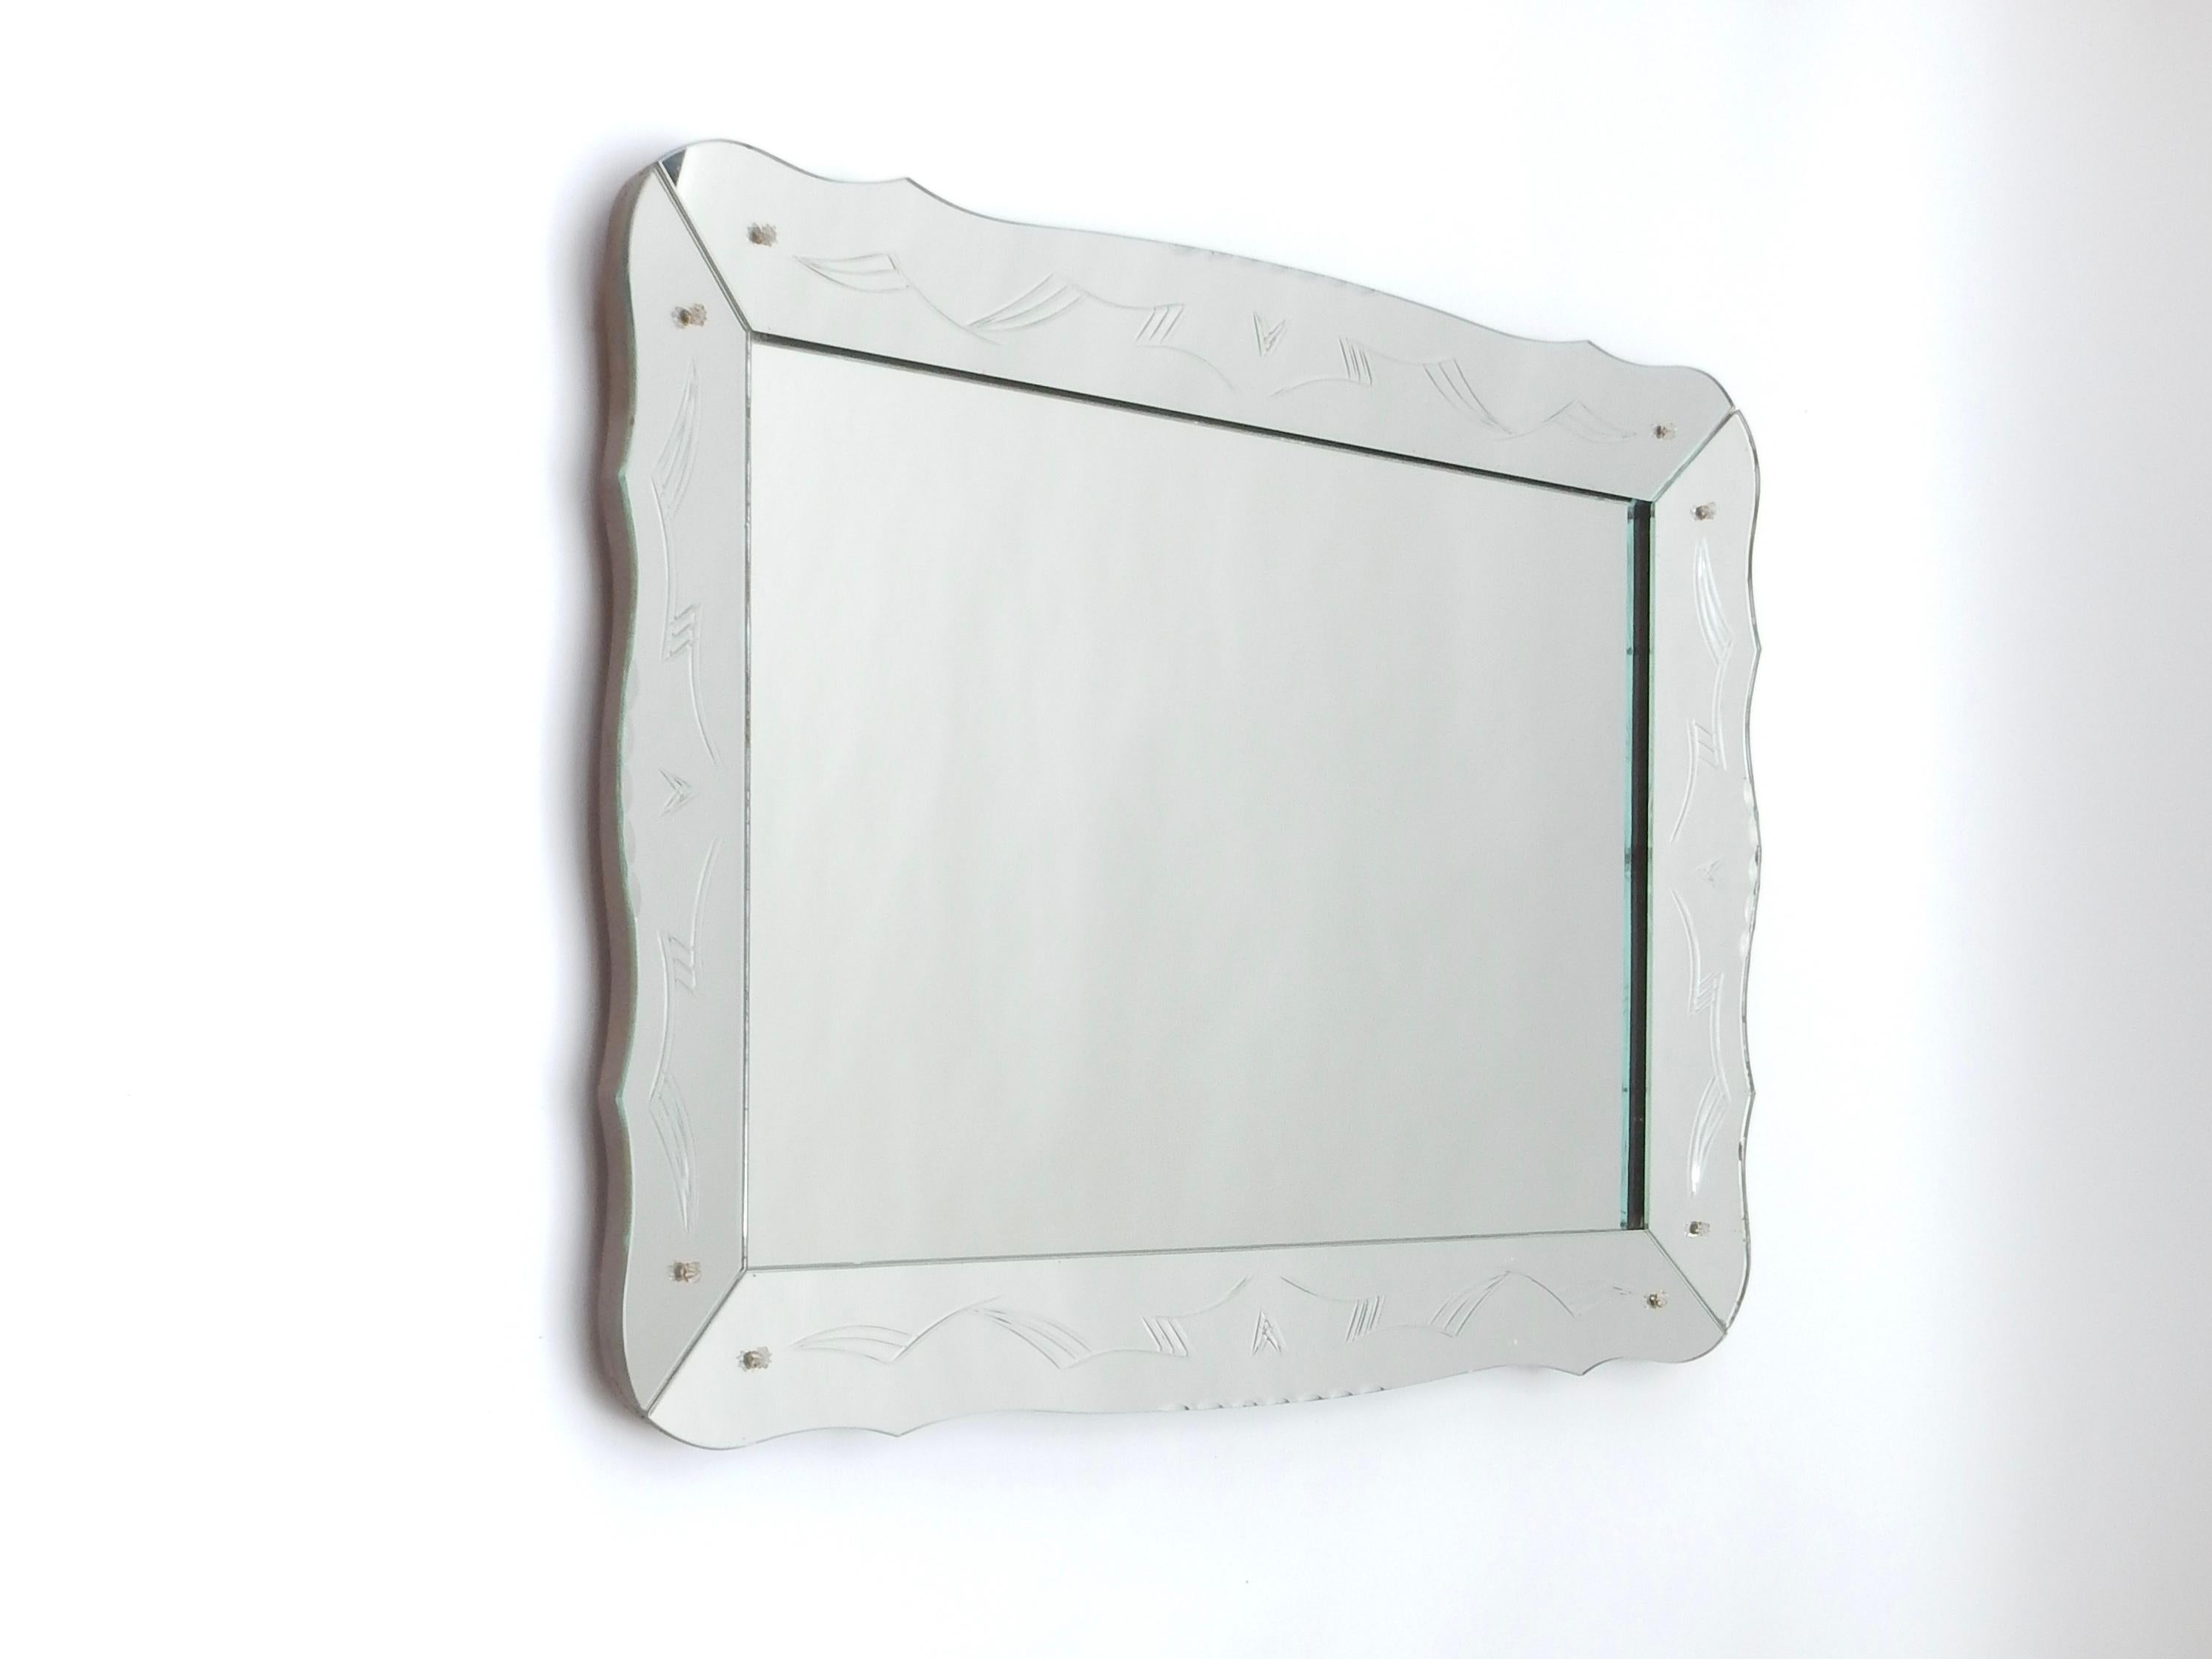 Venetian style mirror with reverse etched design. Serpentine border. Wooden back. Fine quality. May be hung vertically or horizontally. Mirror is currently prepared to hang vertically.
There is a second identical mirror which is for now available,